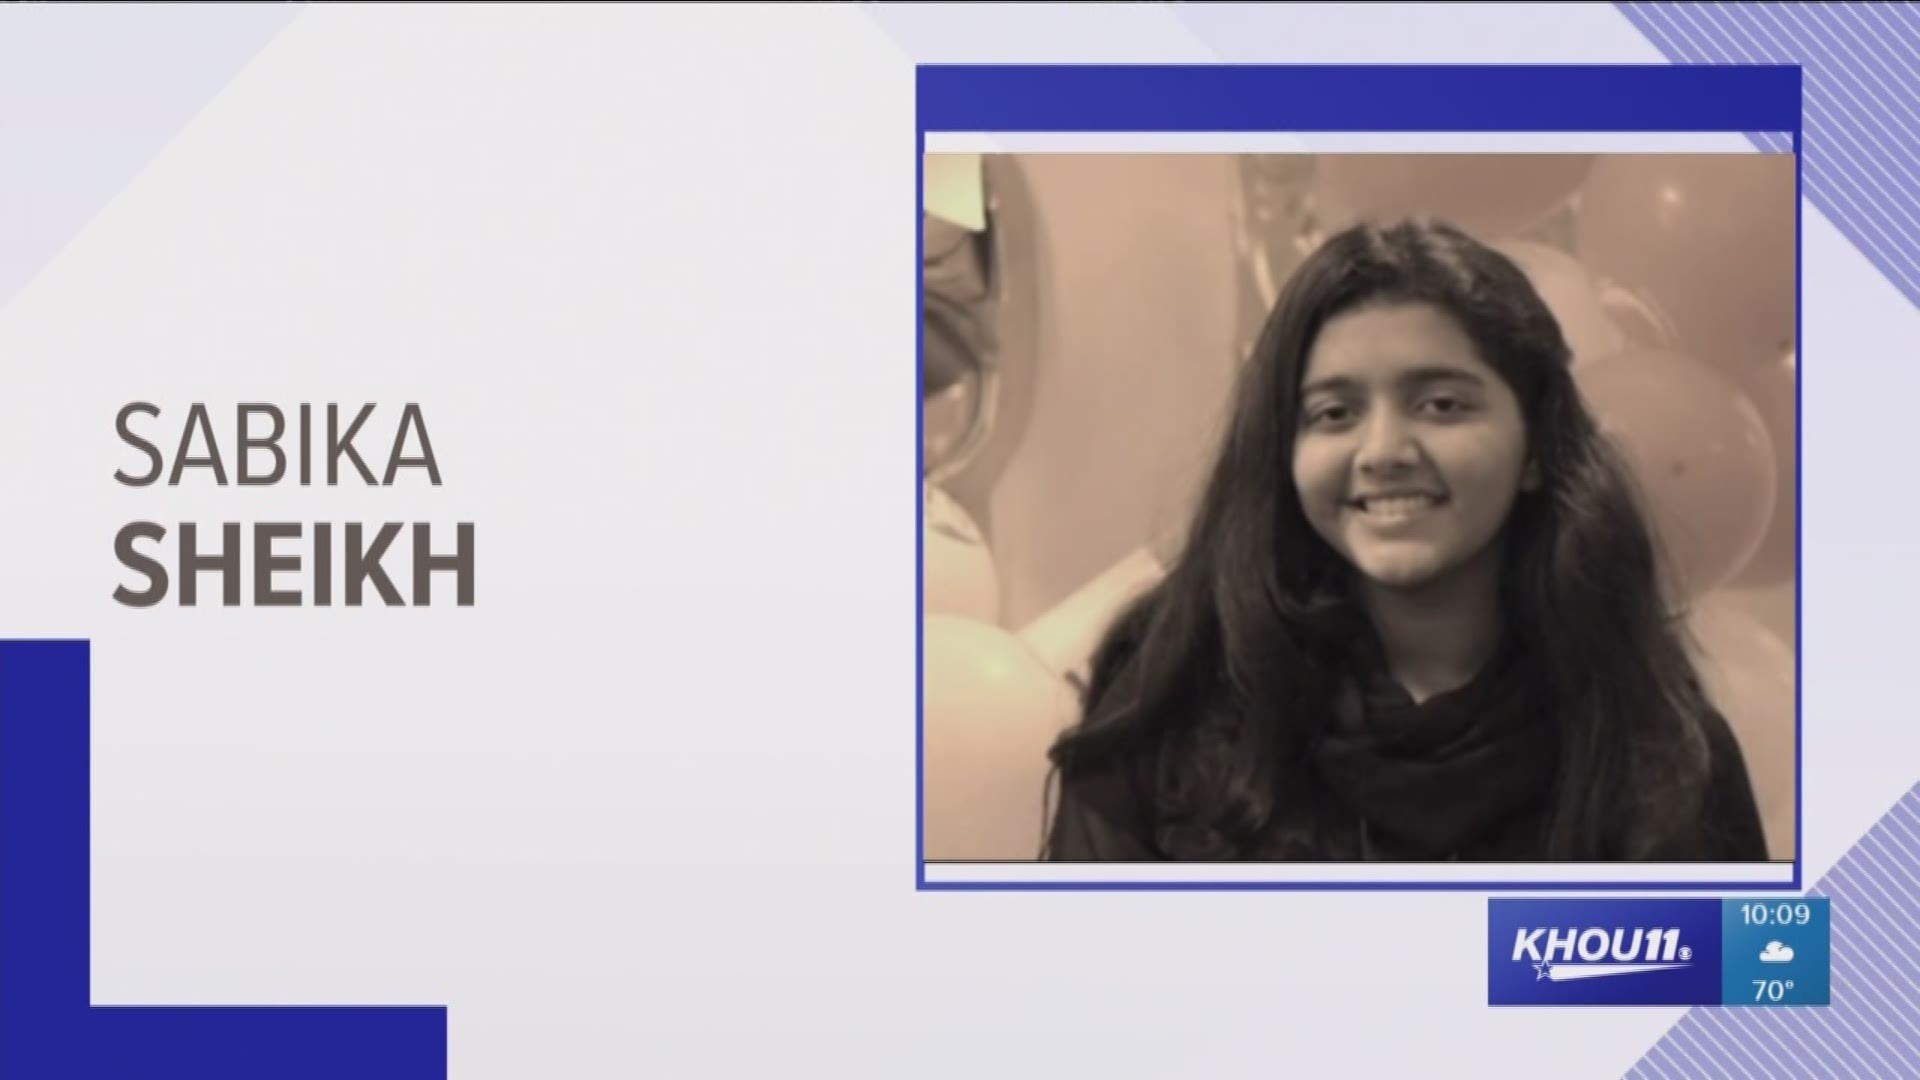 Thousands of people attended a funeral in Stafford for Sabika Sheikh. Sabika was killed in the Santa Fe school shooting